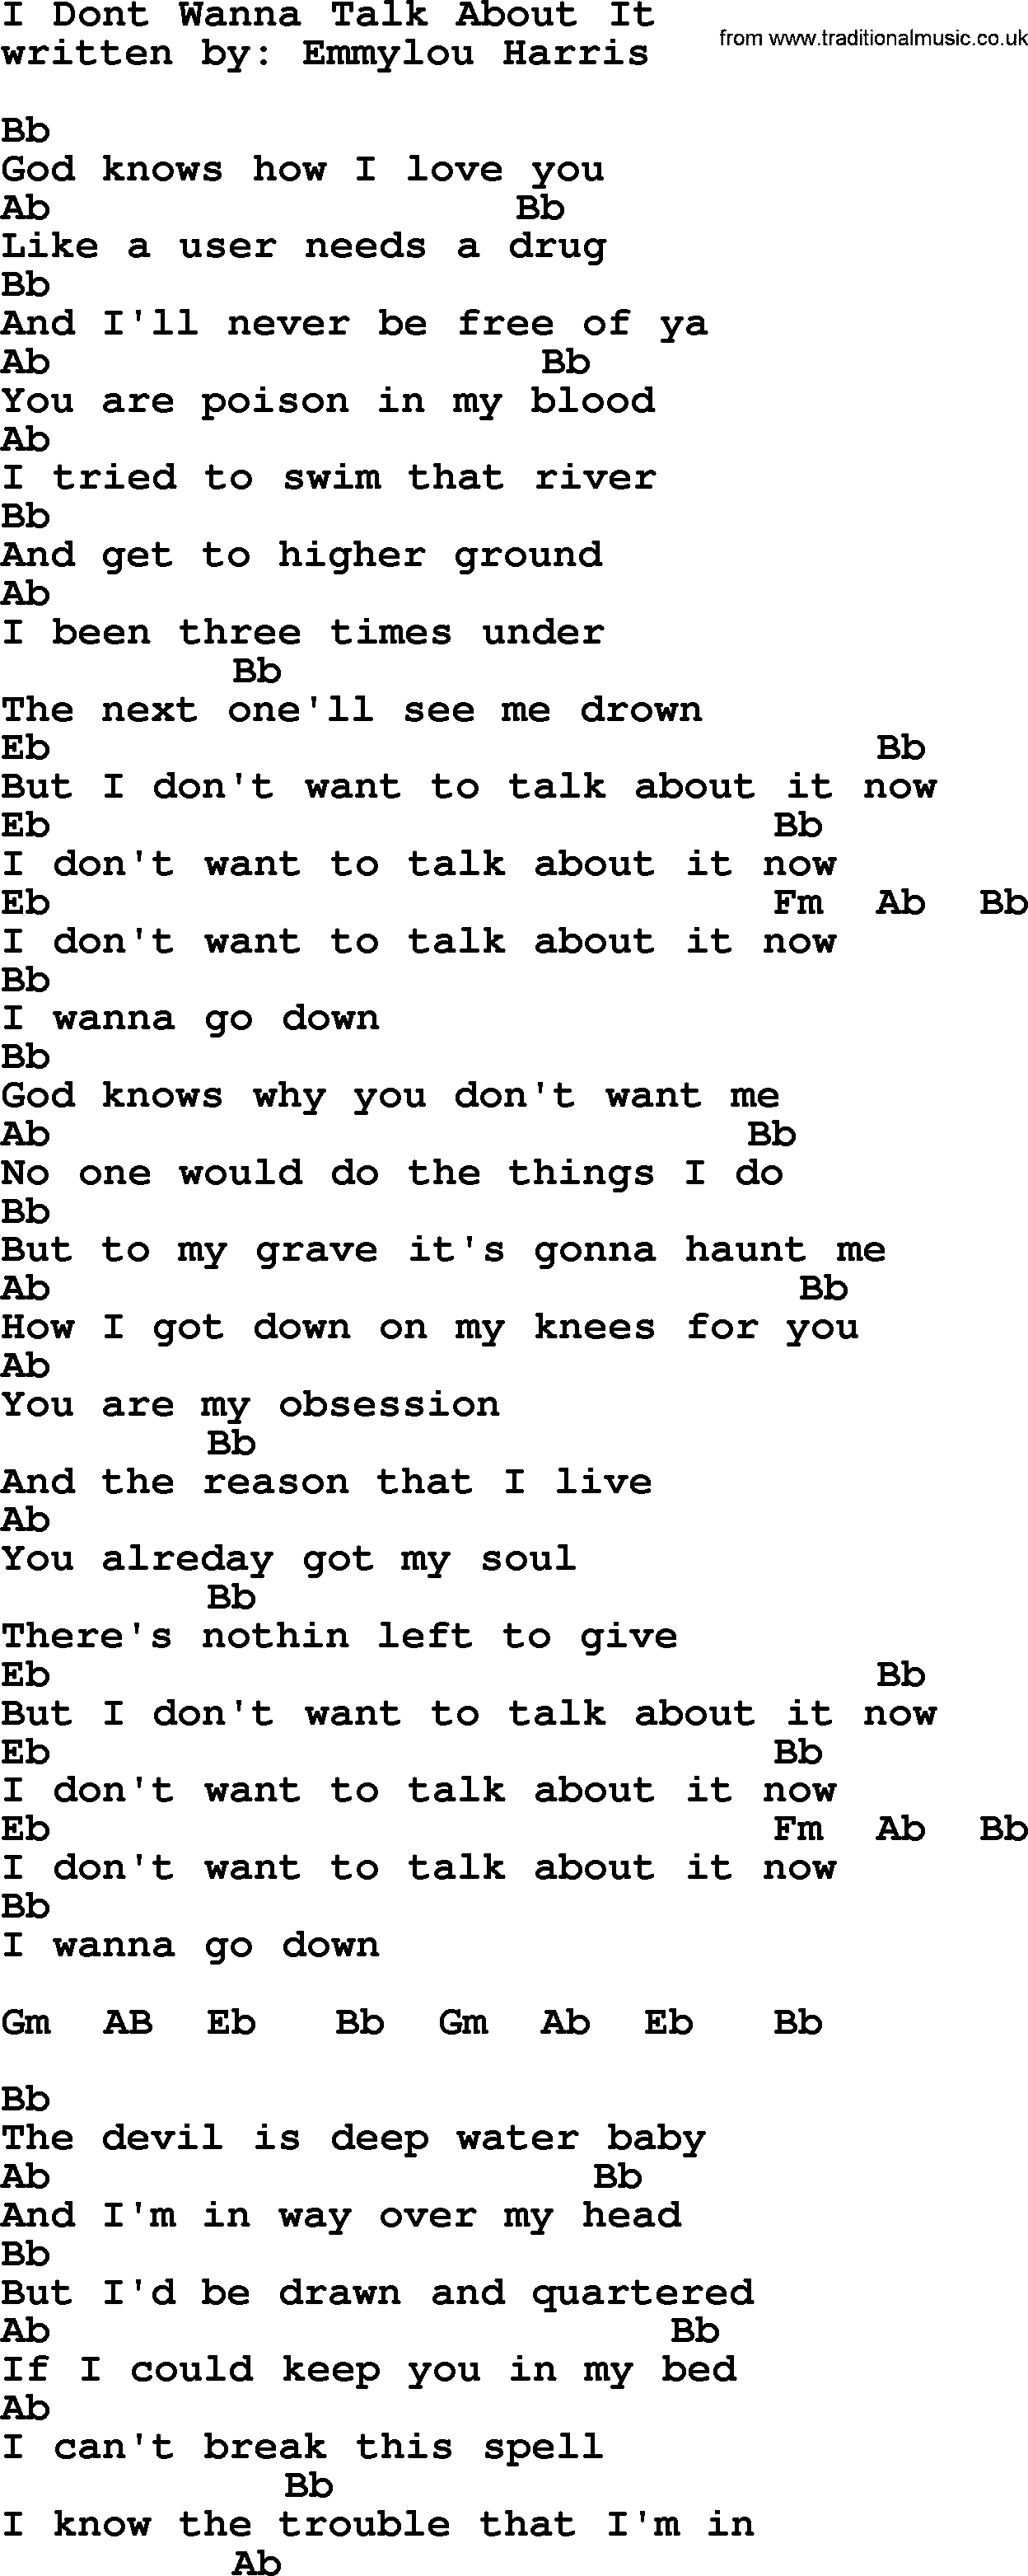 Emmylou Harris song I Dont Wanna Talk About It, lyrics and chords